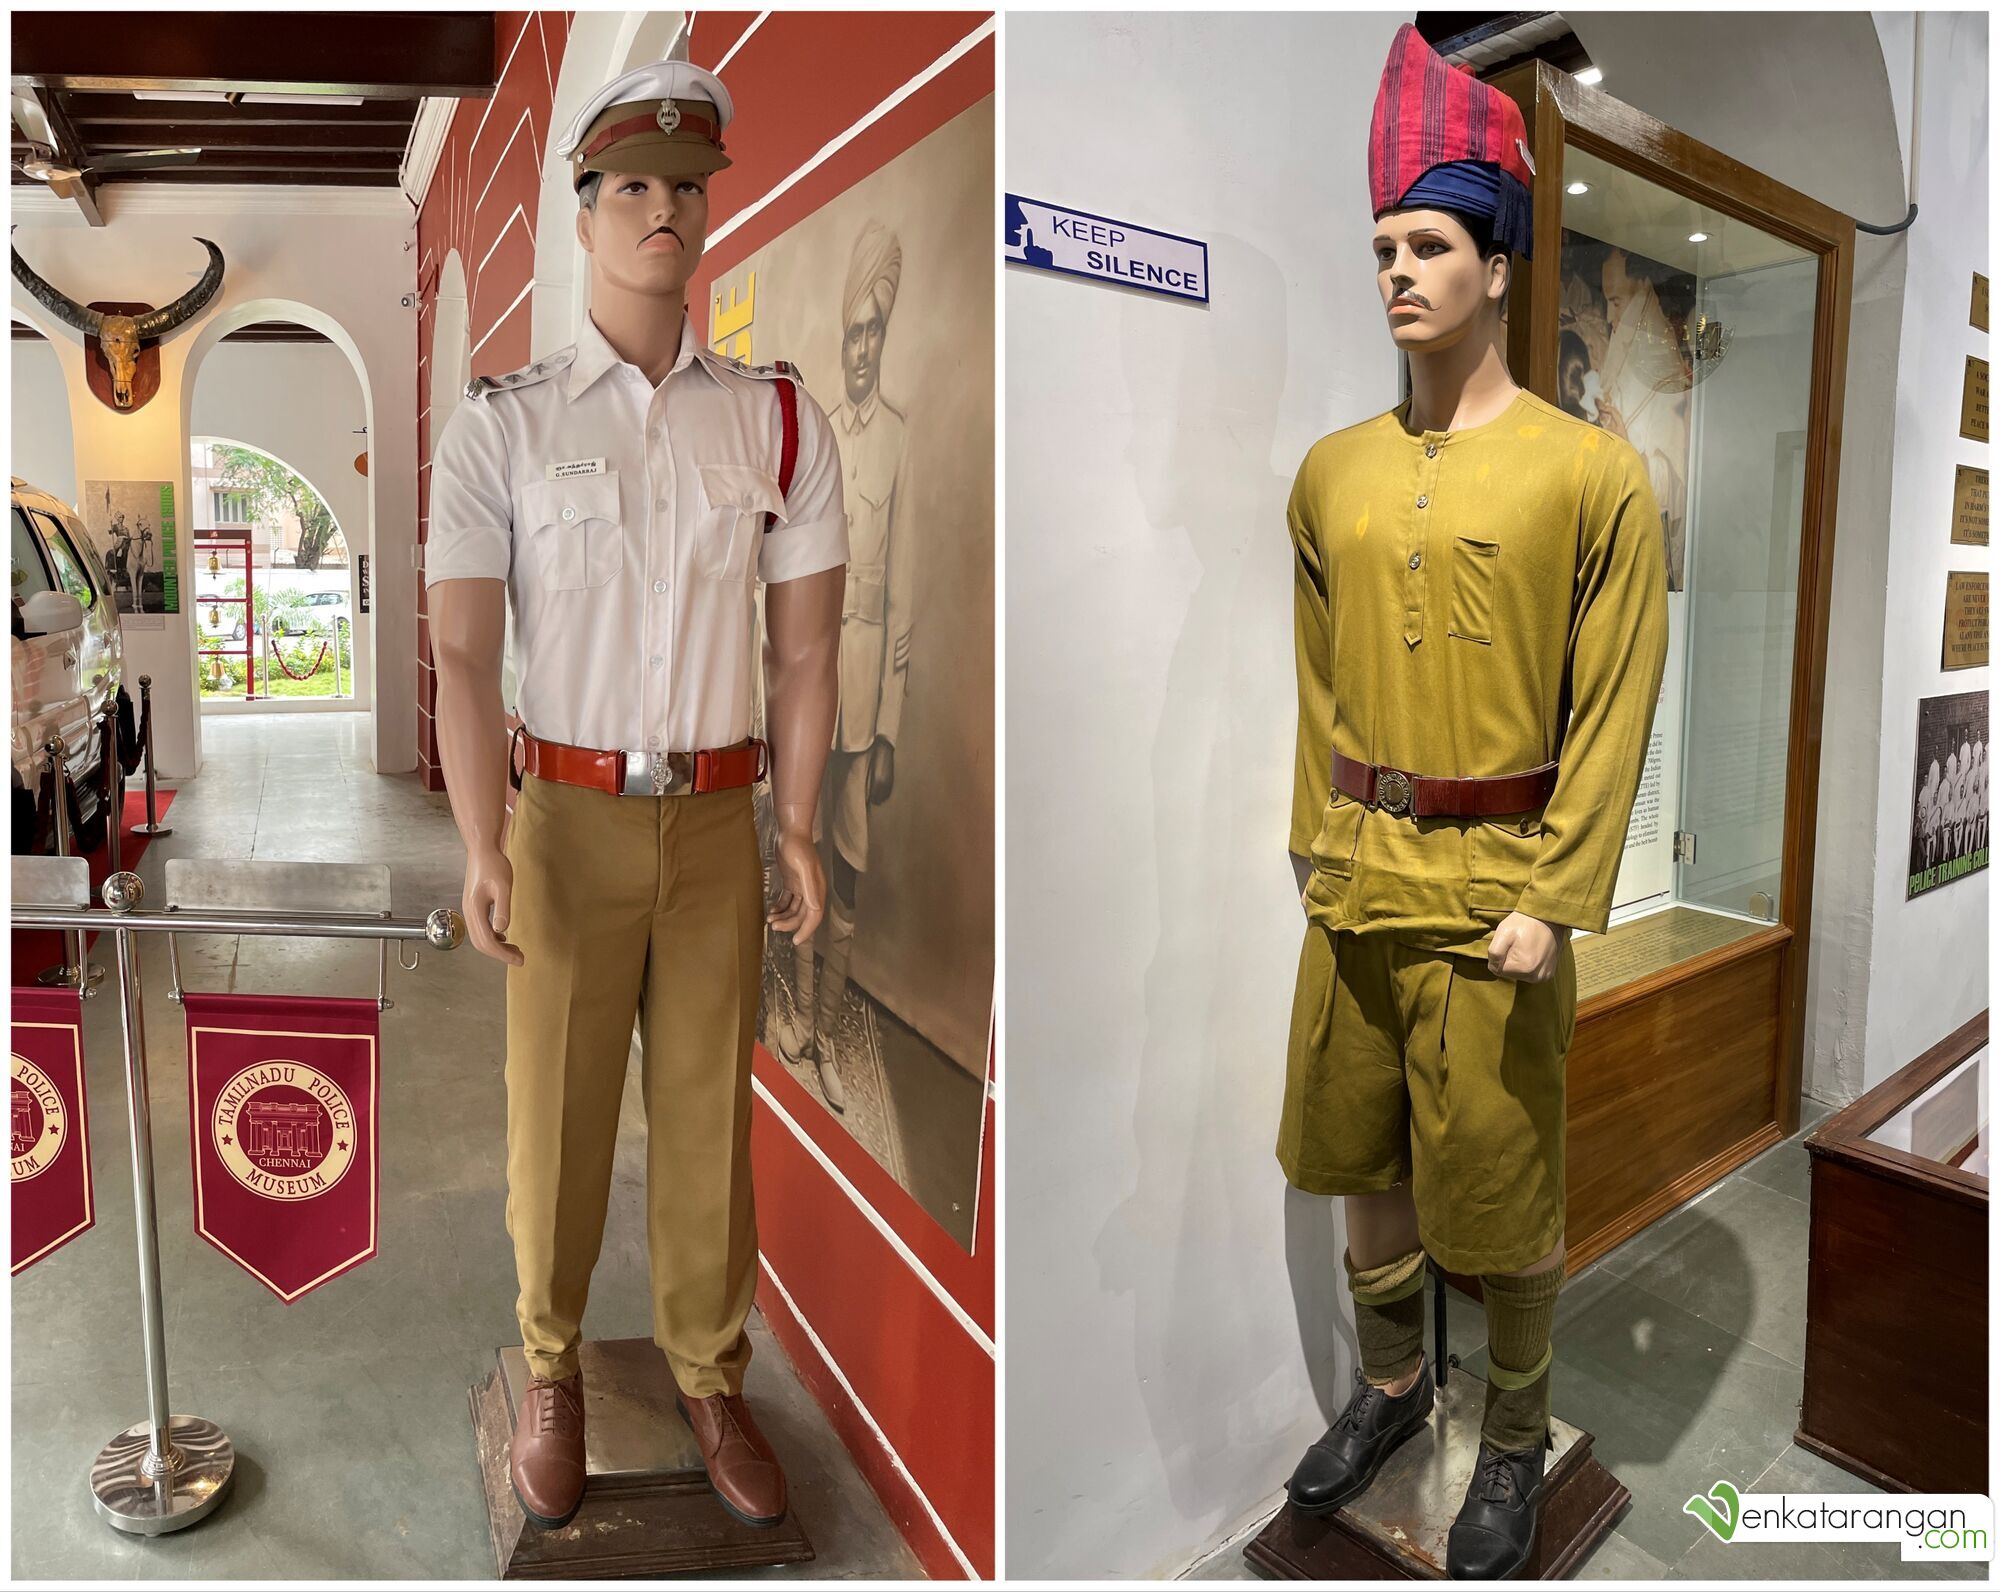 (left) Modern day Uniform of Traffic Police; (right) Uniform for a constable in the decades past